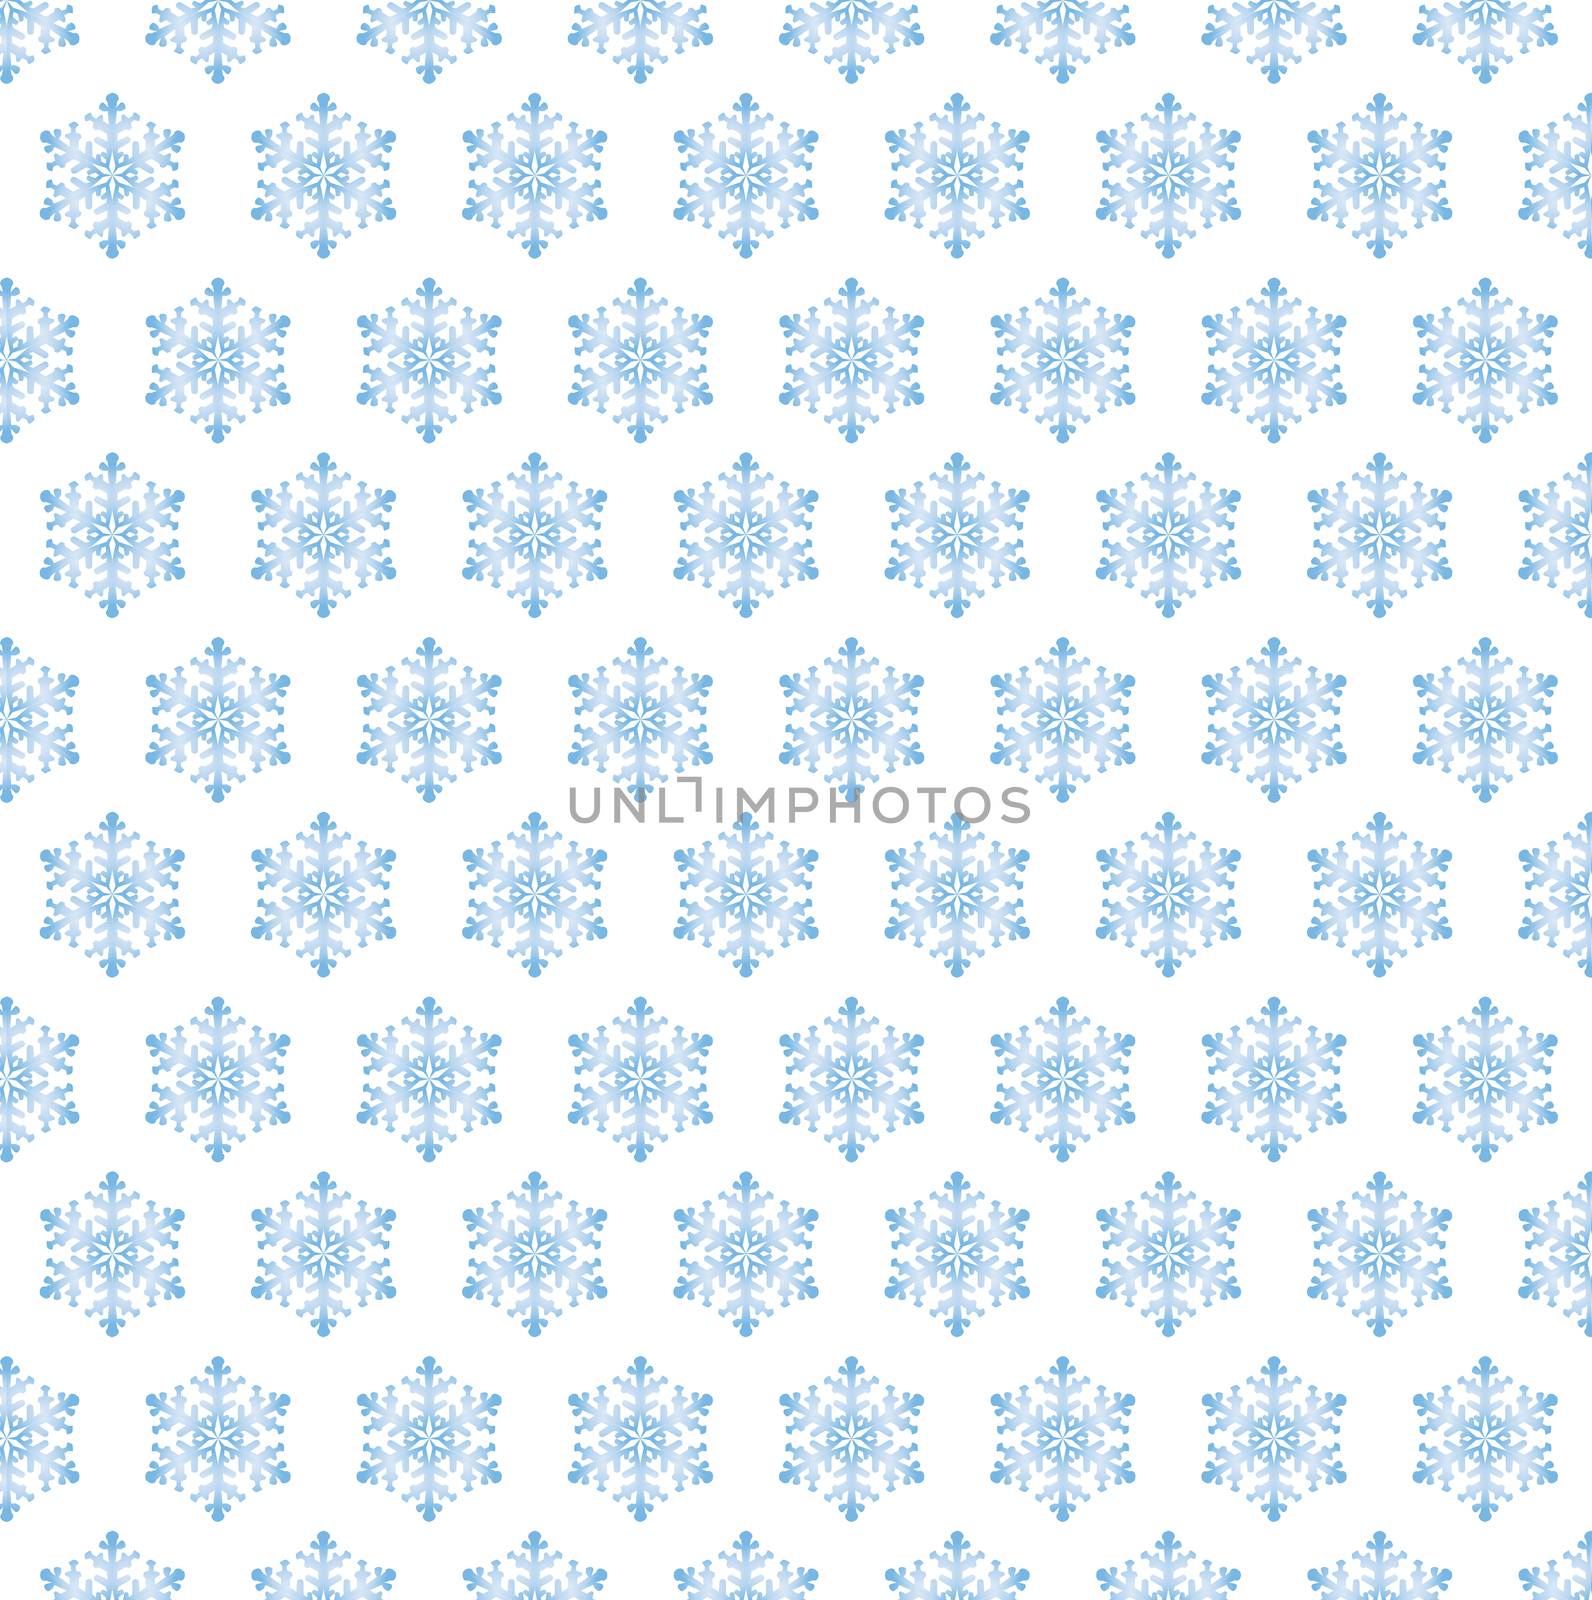 Light blue falling snowflake pattern over a white background